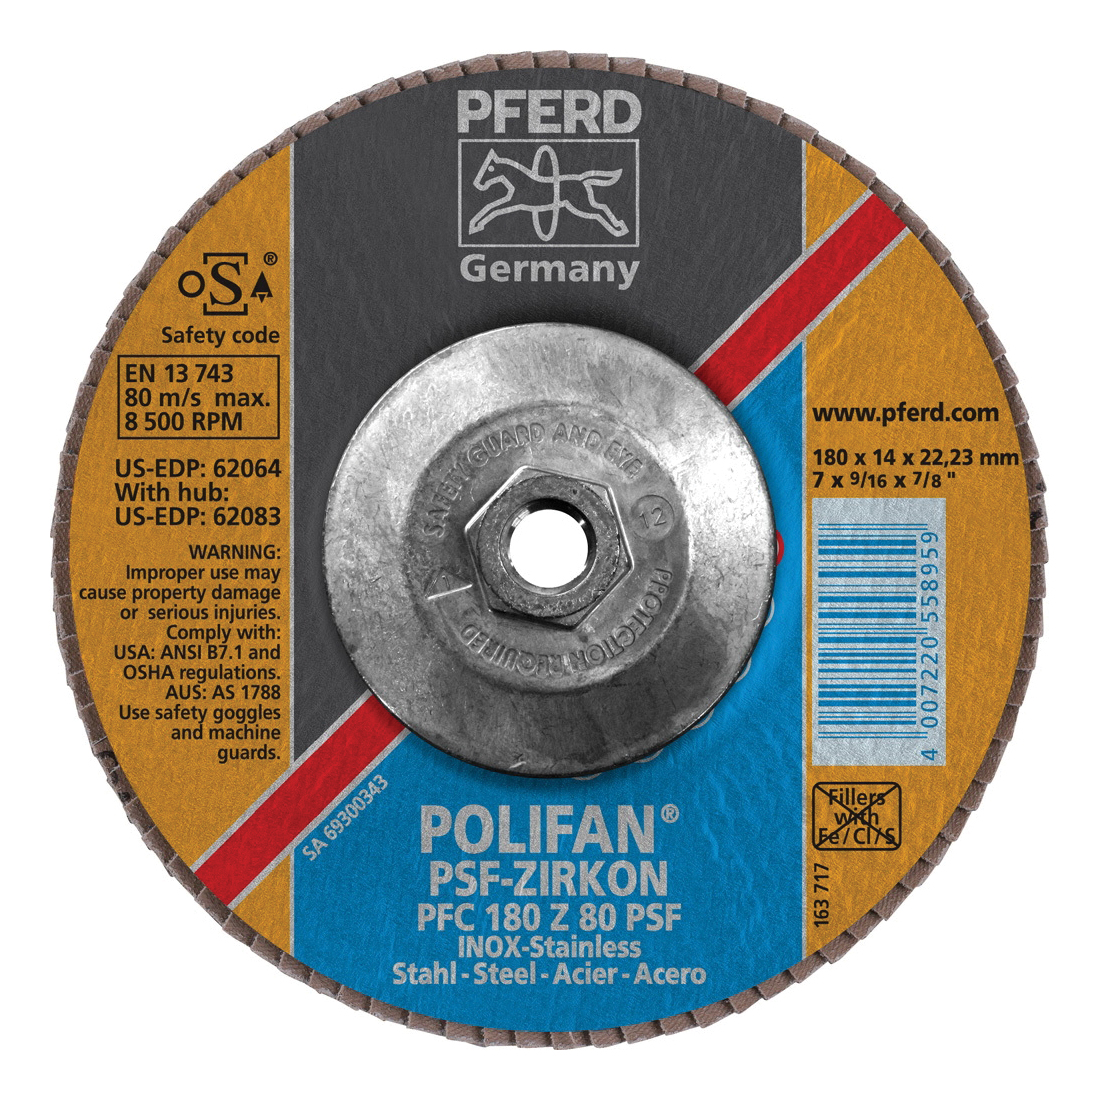 PFERD Polifan® 62083 Universal Line PSF-Z Threaded Coated Abrasive Flap Disc, 7 in Dia, 80 Grit, Zirconia Alumina Abrasive, Type 29 Conical Disc